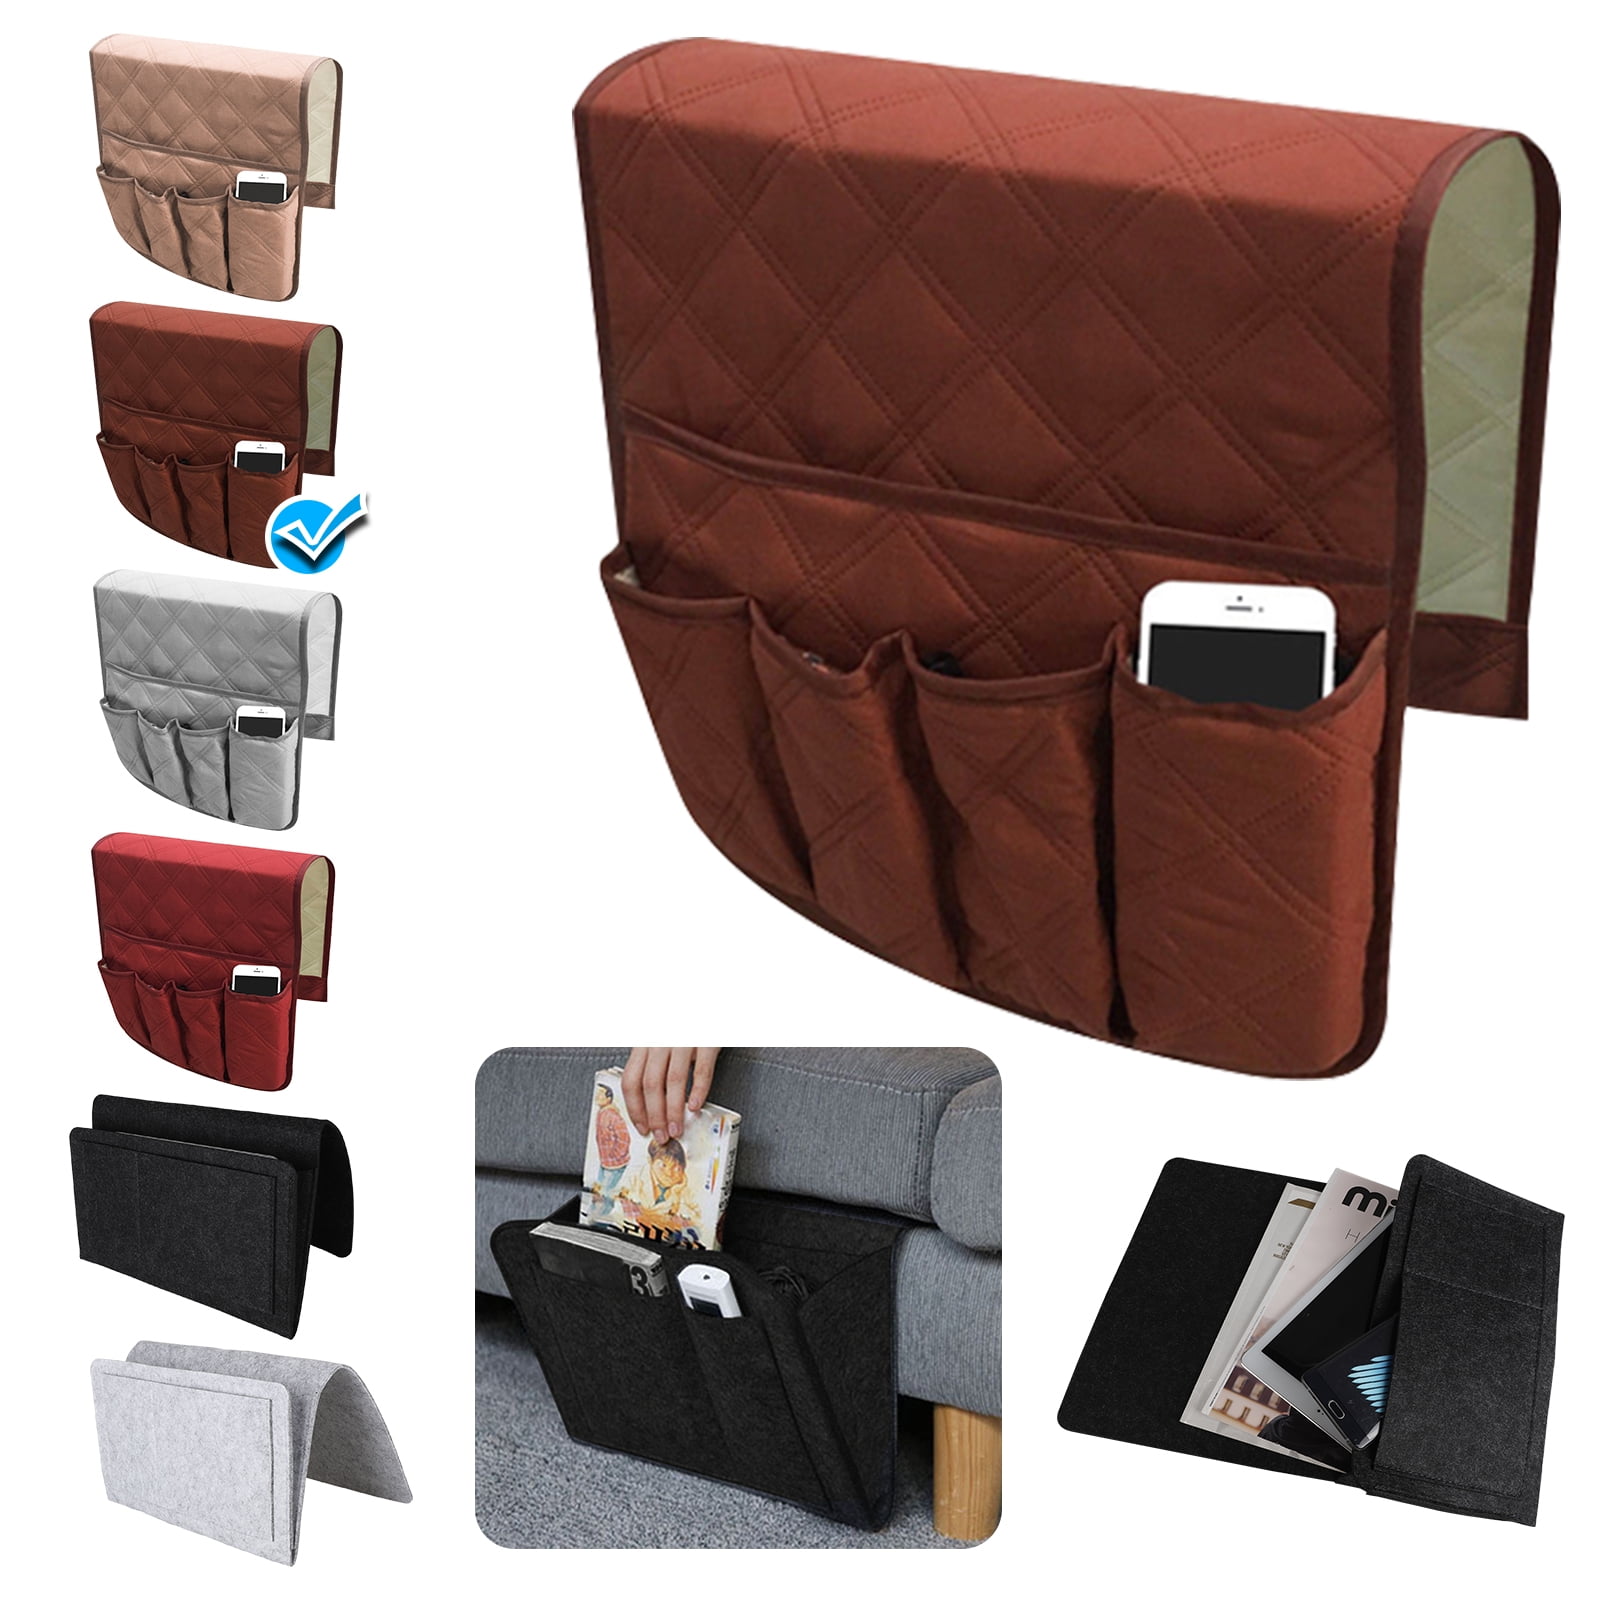 Smart Phone Book Black Siveit Non-Slip Couch Sofa Chair Armrest Organizer Armchair Caddy with 5 Pockets for TV Remote Control Holder Ipad Magazines